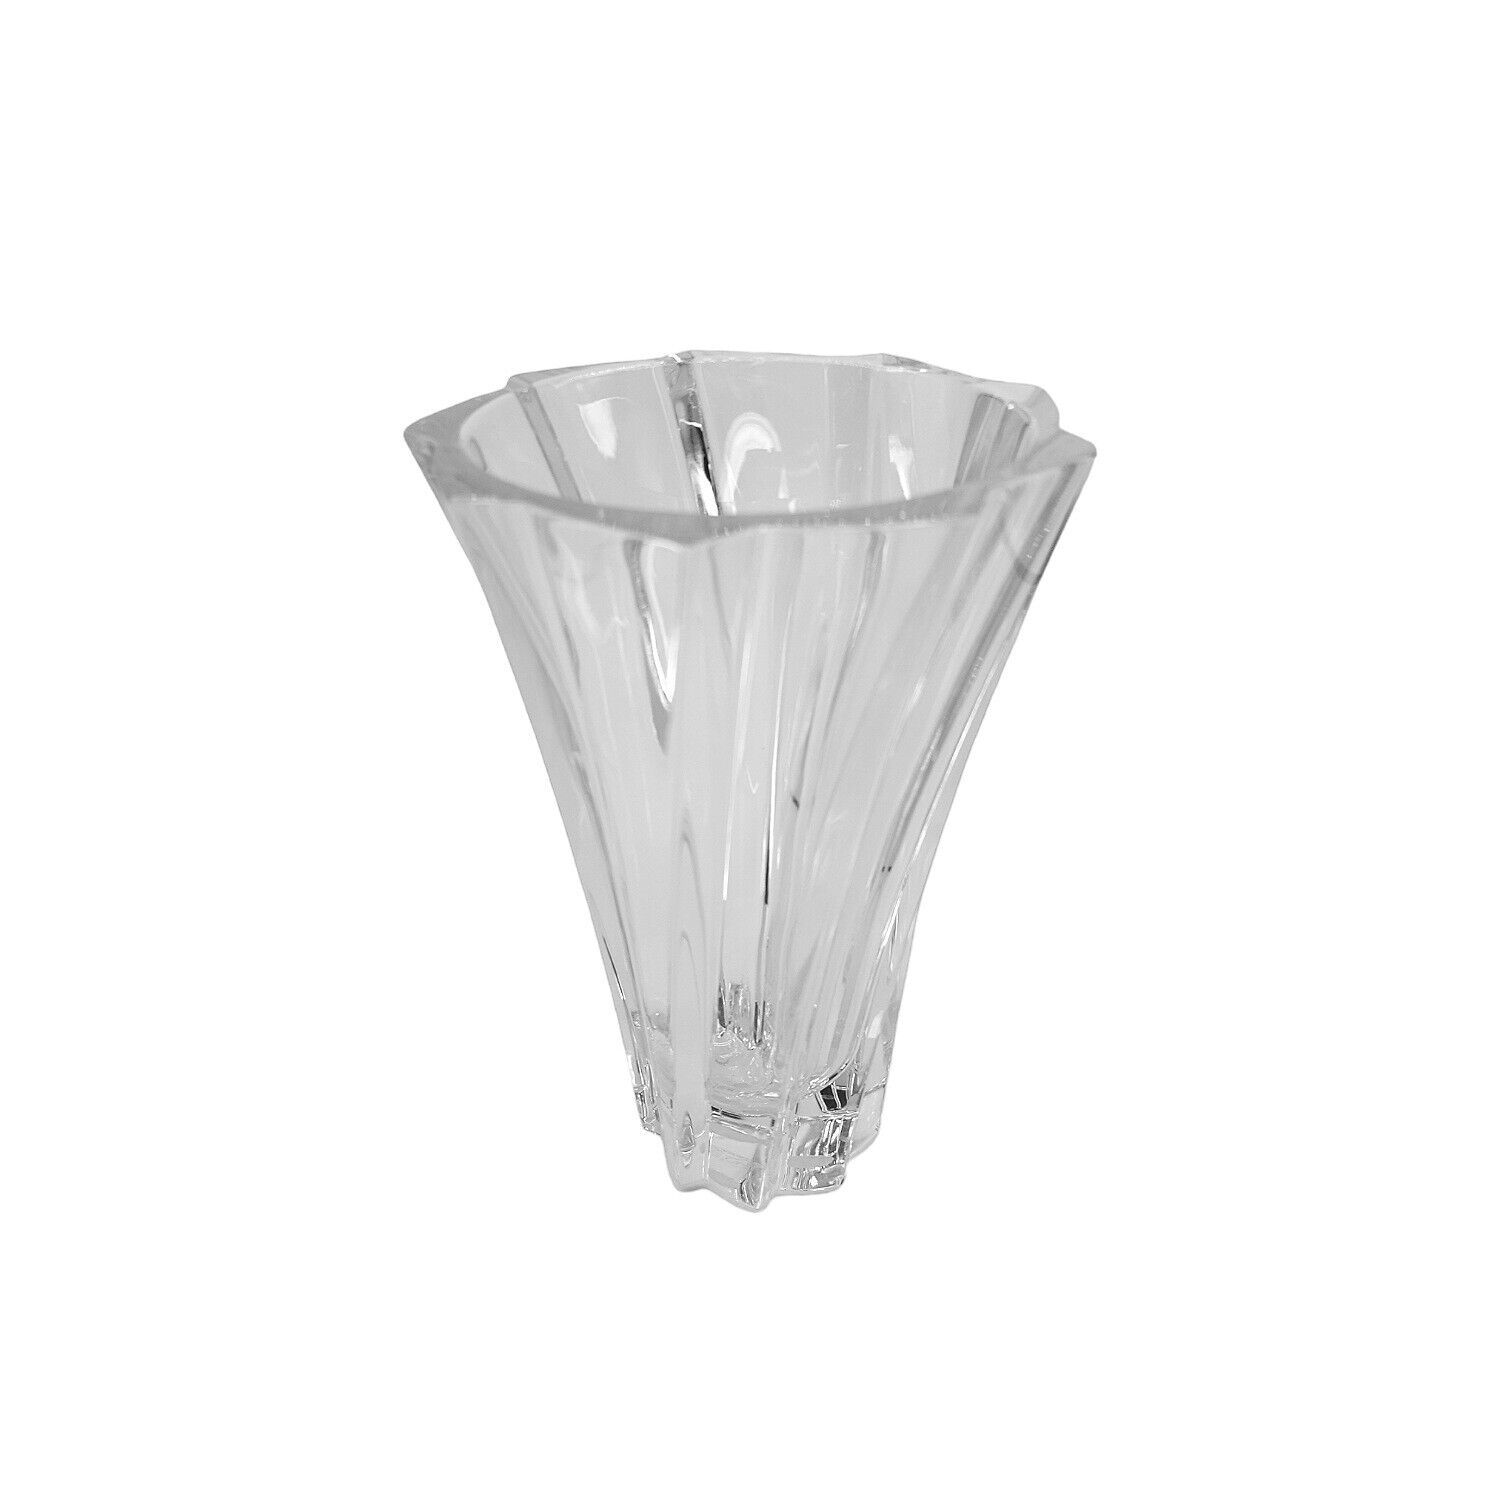 Baccarat Small Objectif Vase